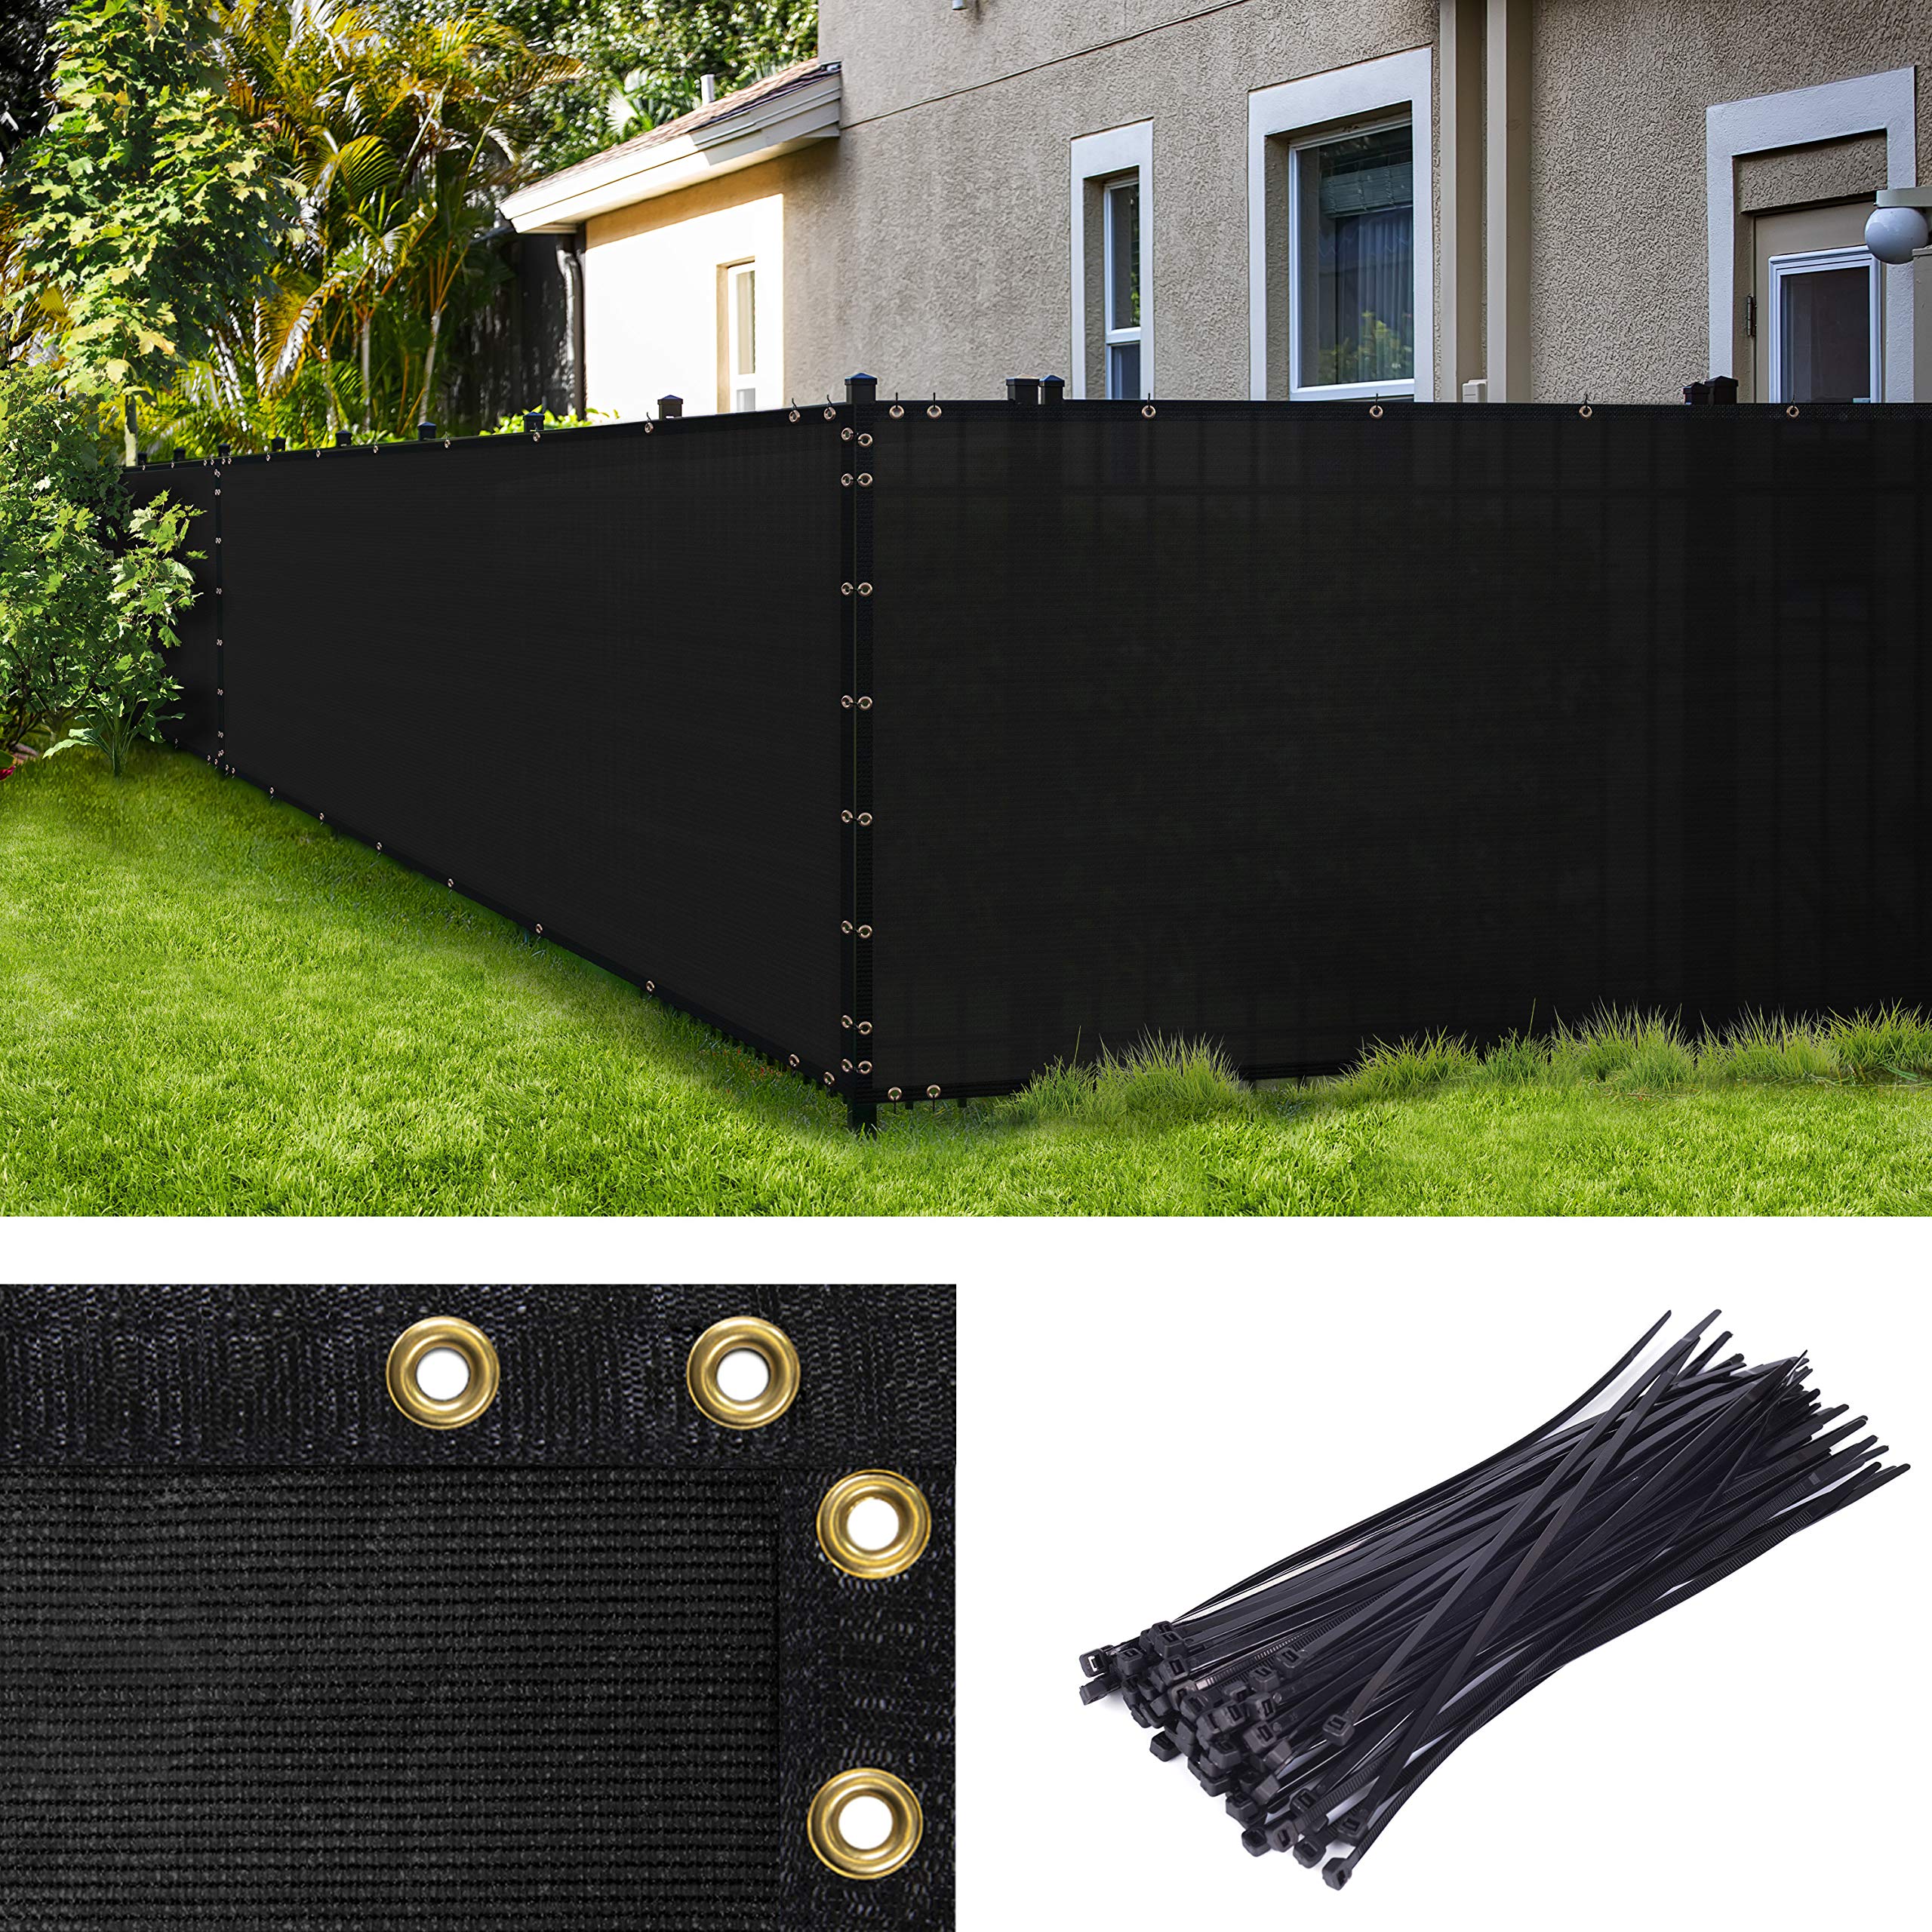 Amgo custom Made 6 x 175 custom Size Black Fence Privacy Screen Windscreen,with Bindings & grommets Heavy Duty for comme